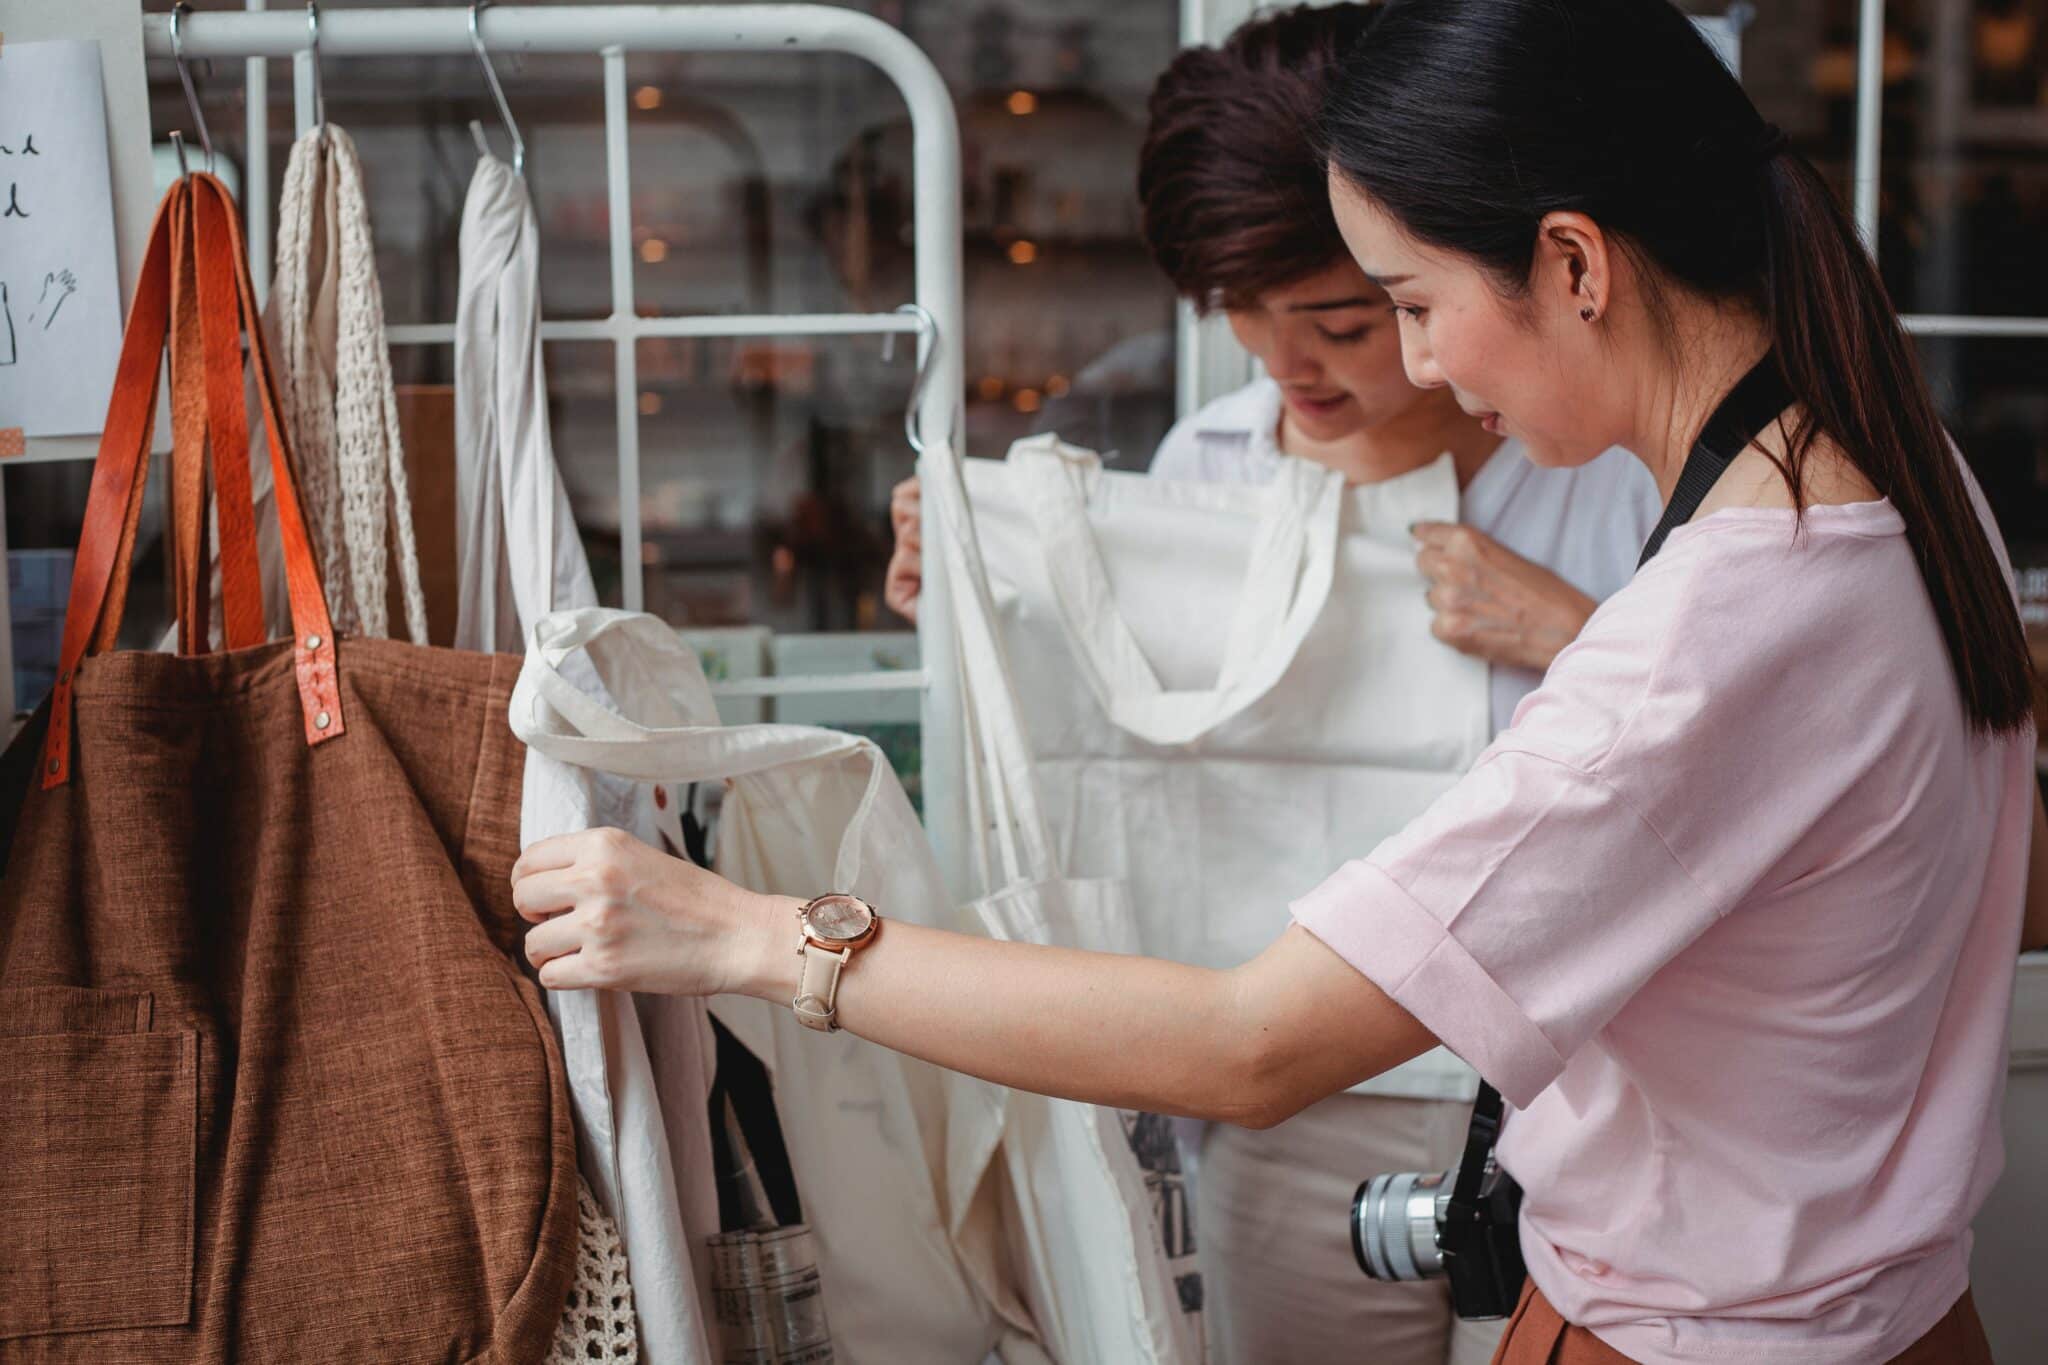 Ilustrasi Sustainable Fashion/Photo by Sam Lion: https://www.pexels.com/photo/trendy-young-asian-women-choosing-cotton-bags-in-fashion-boutique-5710151/